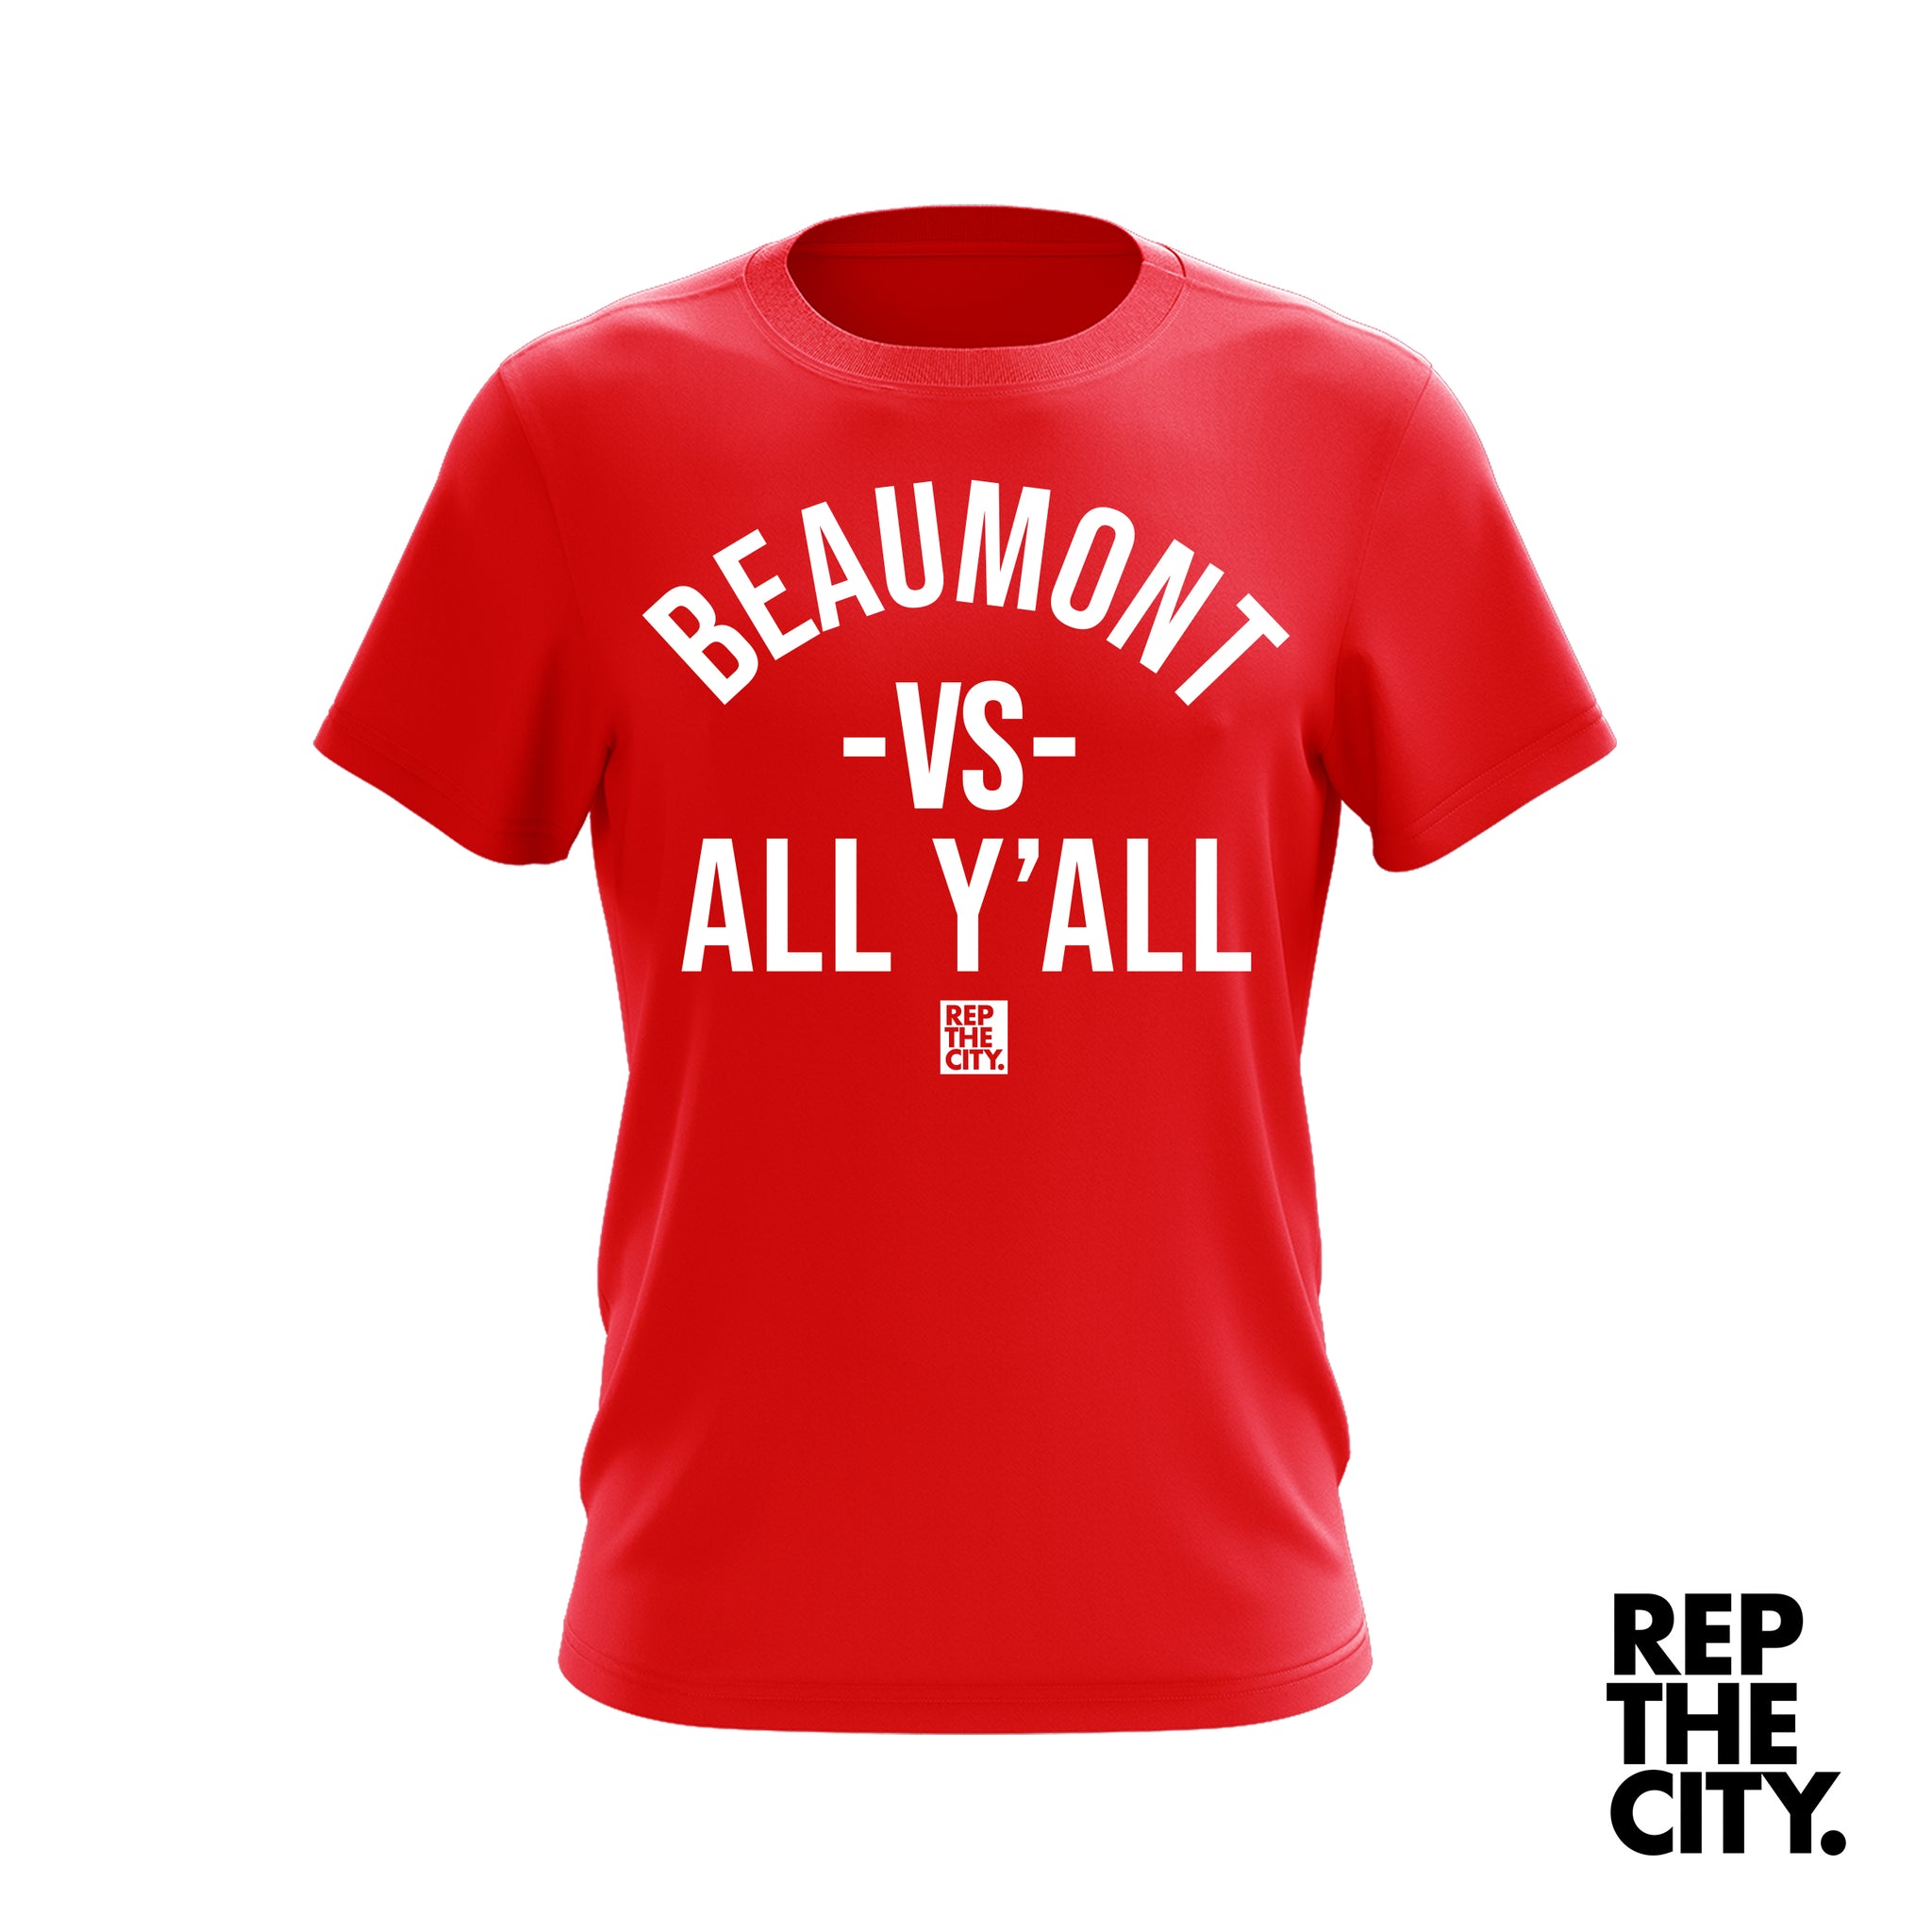 Beaumont Vs All Y'all Tee